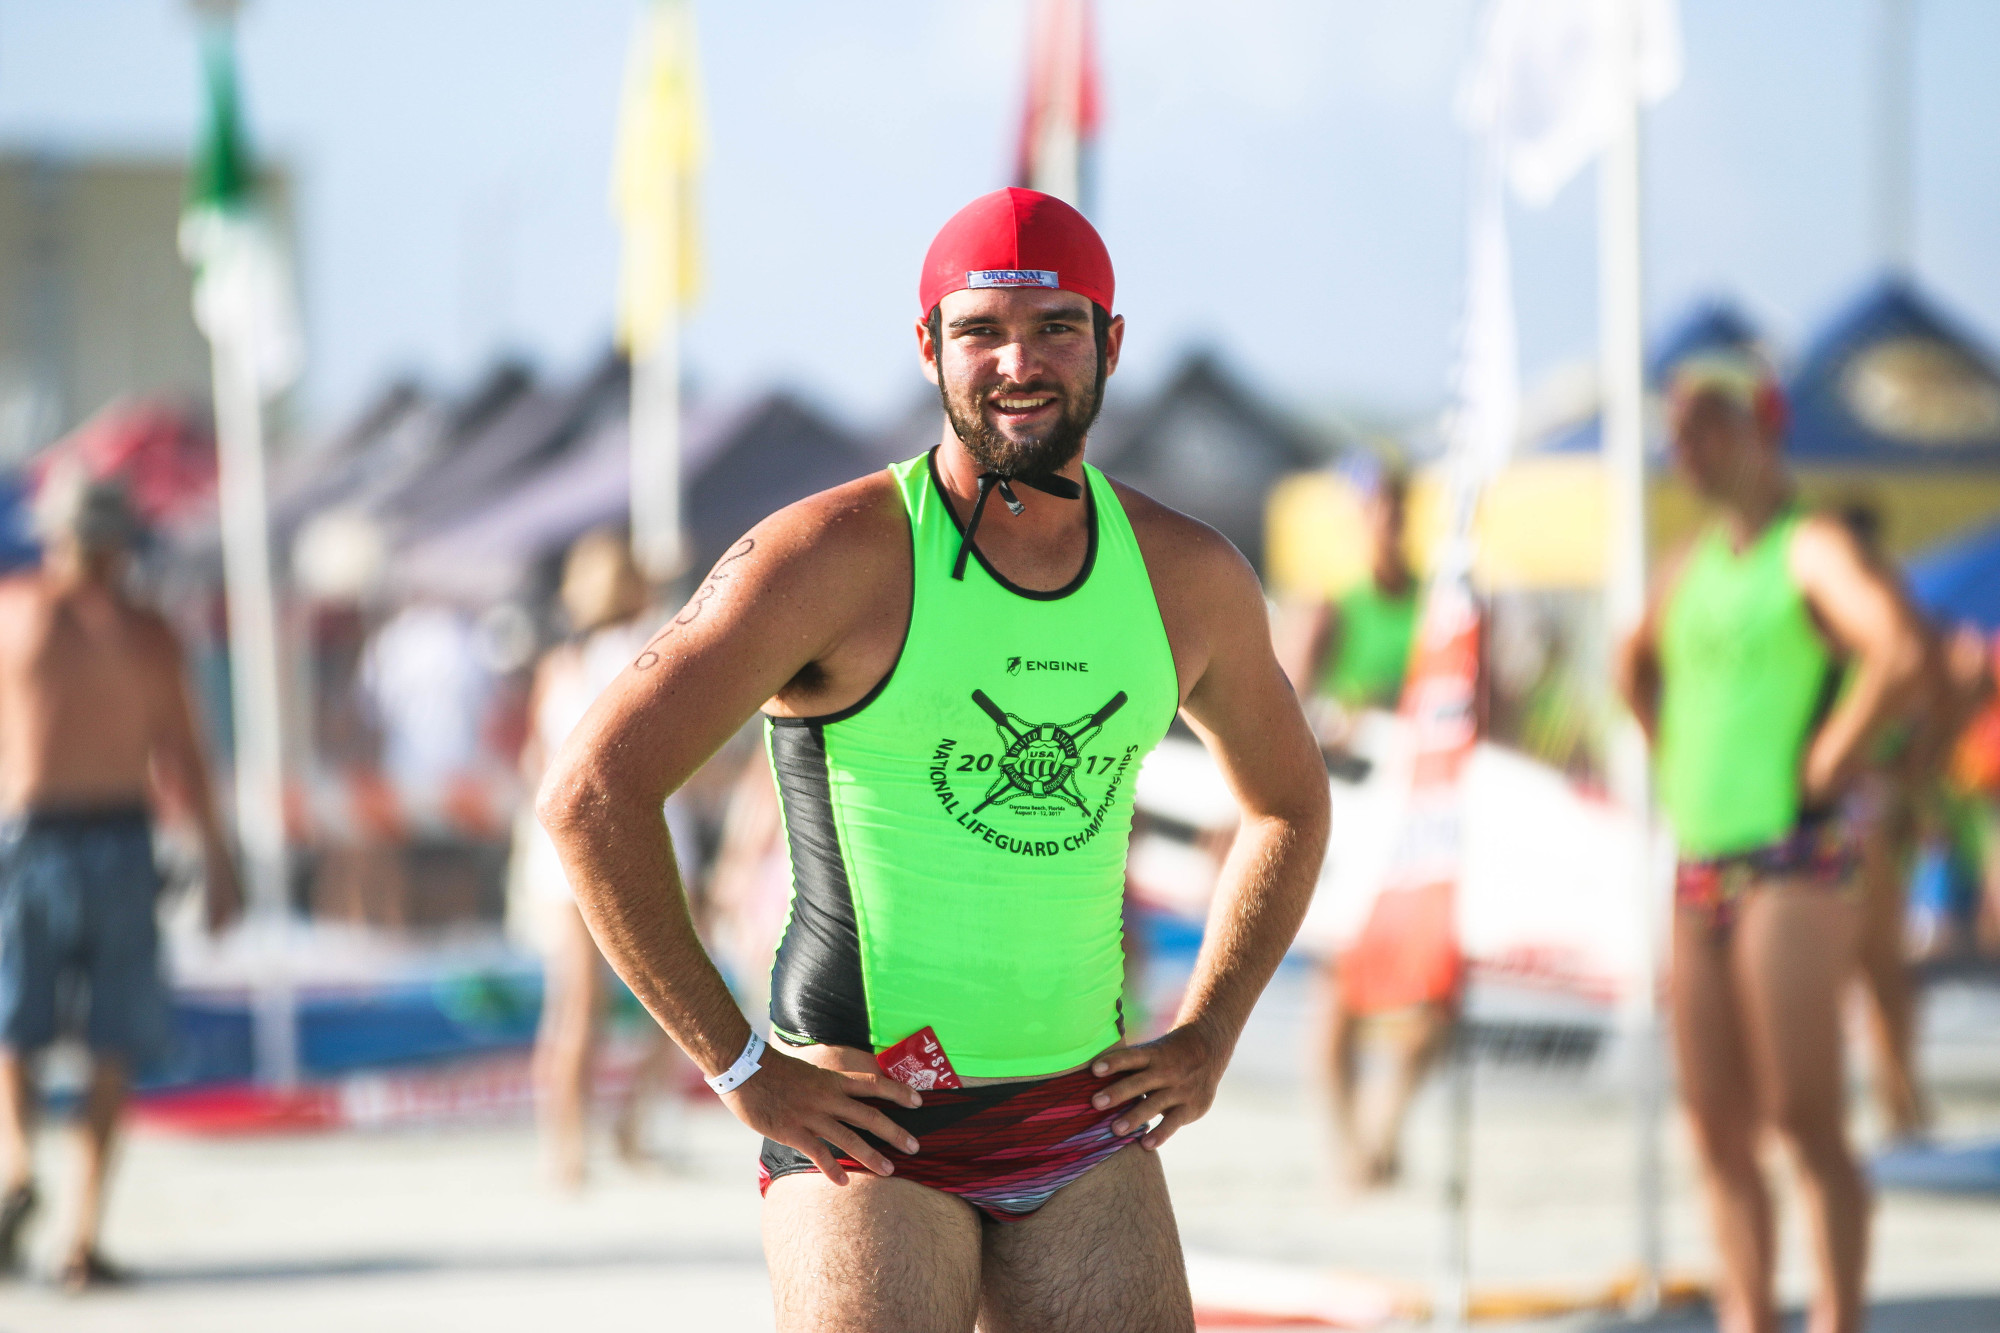 Clayton DuBrule at the 2017 National Lifeguard Championships. Photo by Paige Wilson